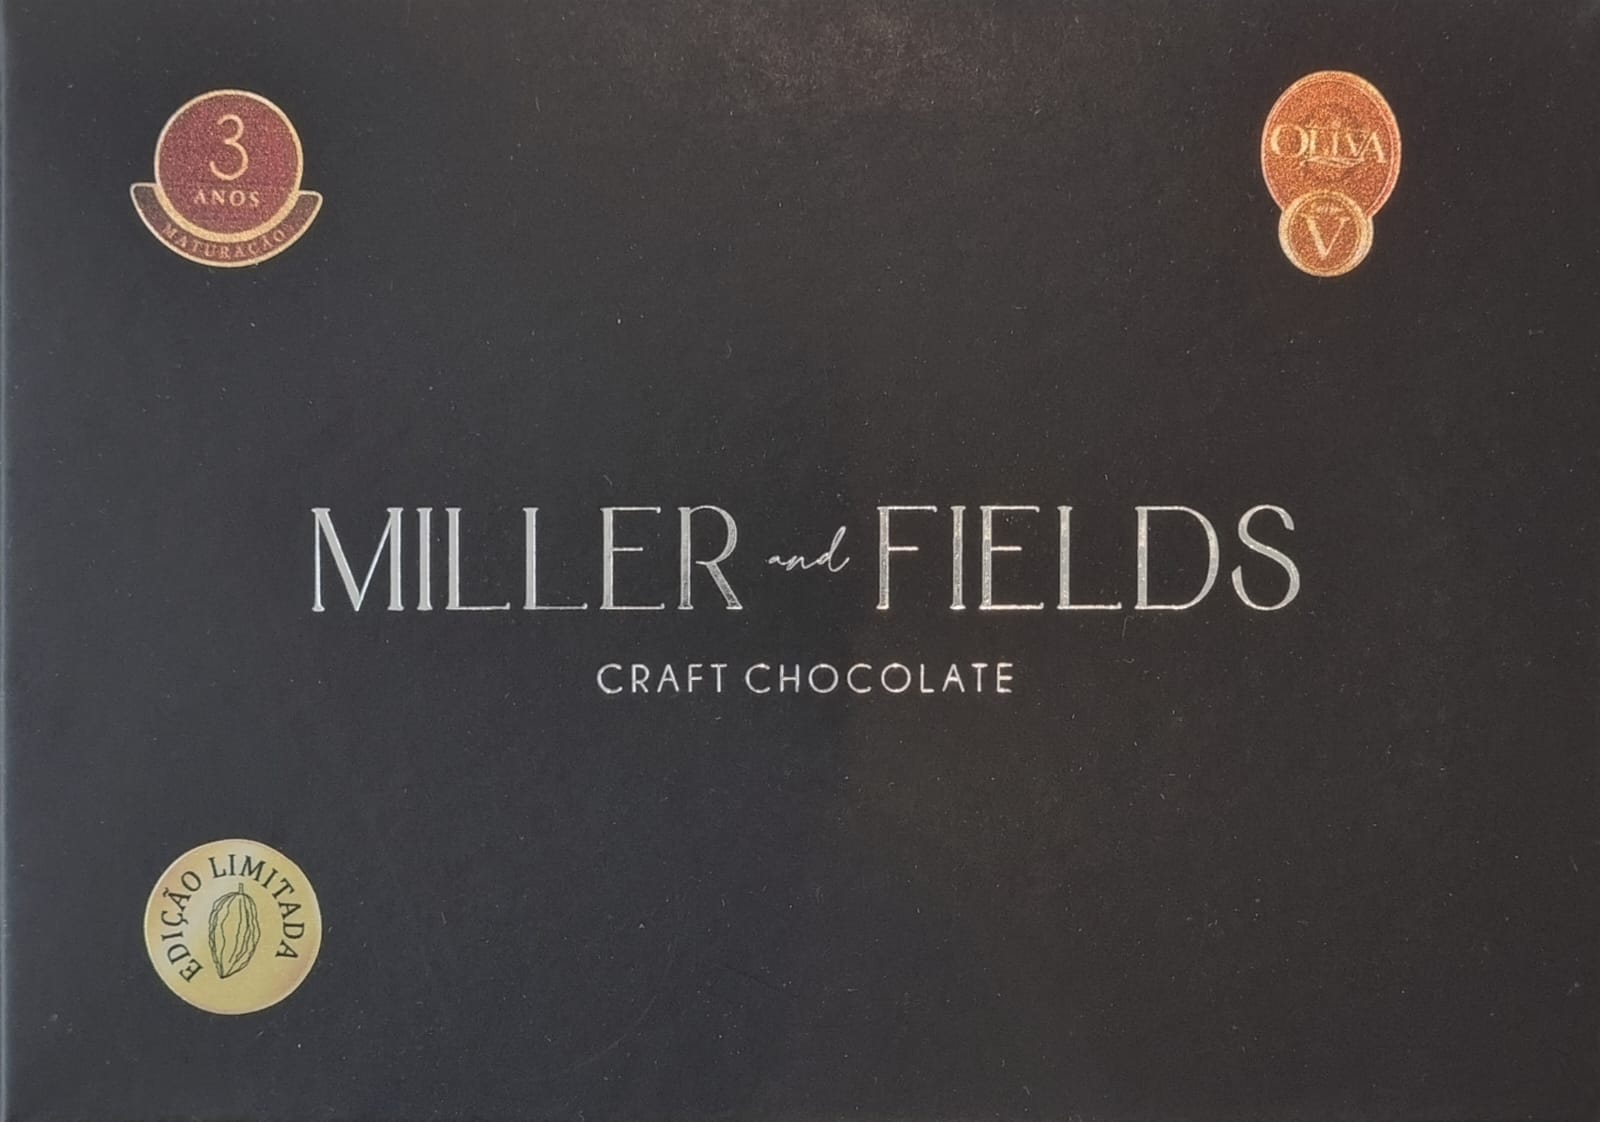 Craft Chocolate Miller and Fields Oliva Serie V - 9g.